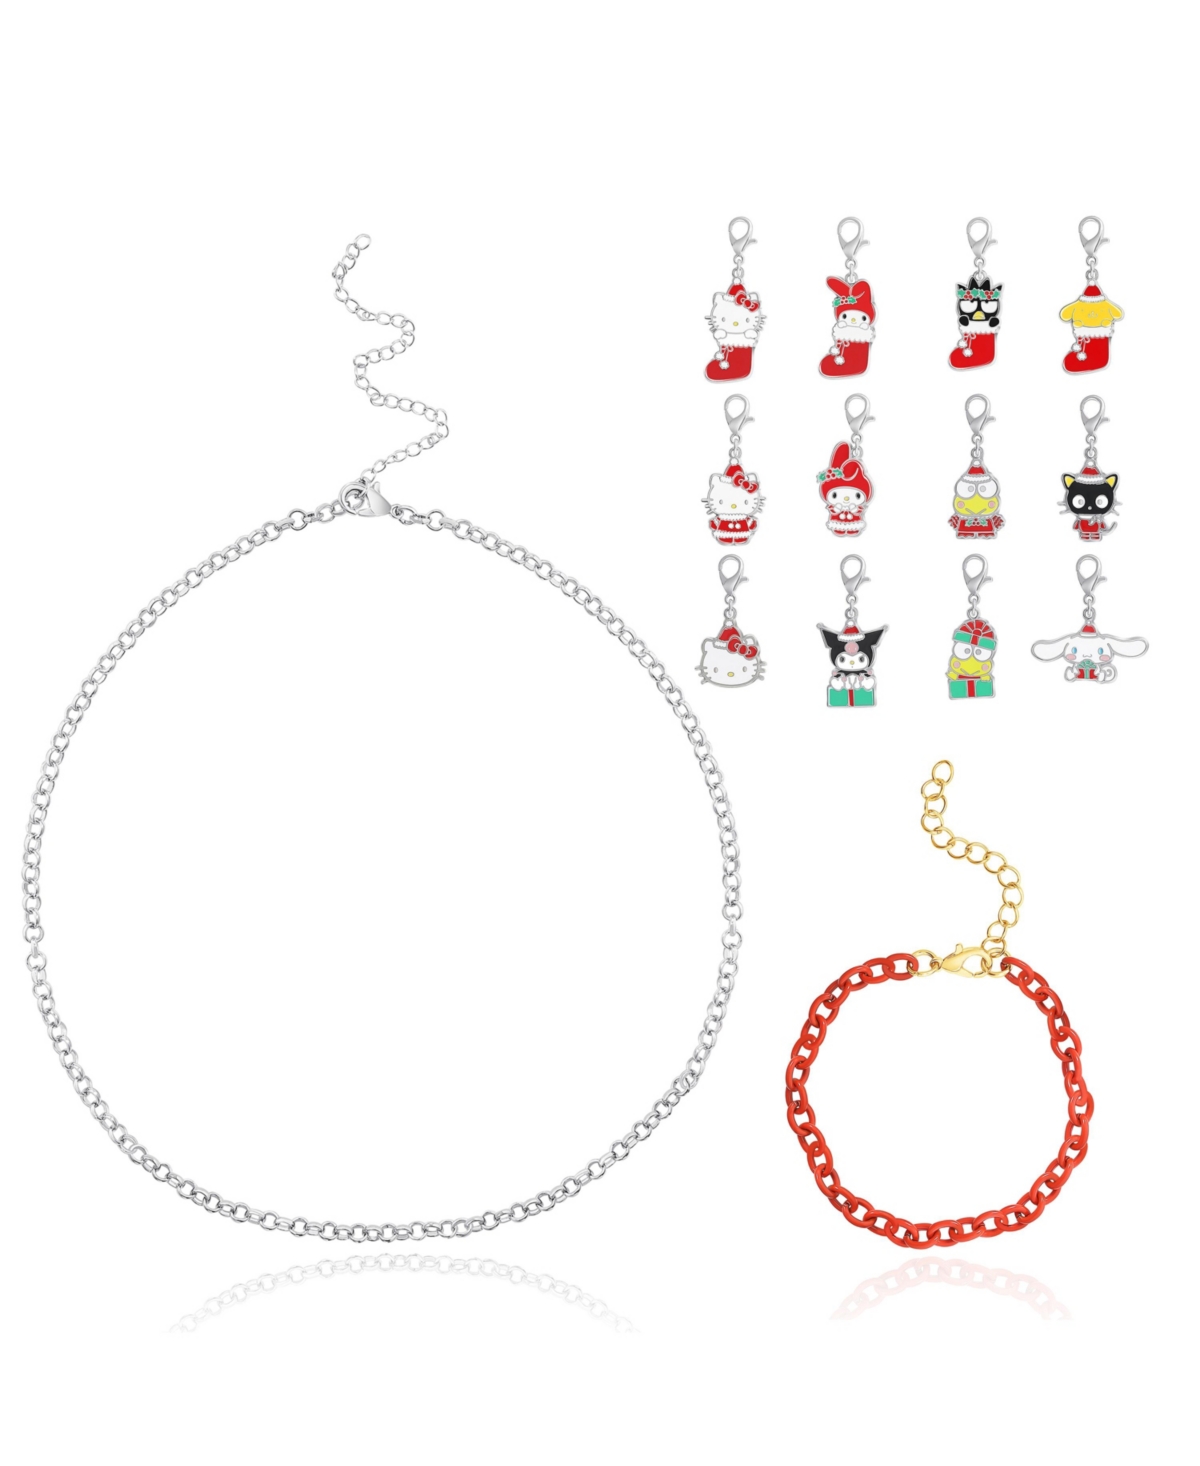 Sanrio Hello Kitty Necklace and Bracelet with 12 Sanrio Charms Customizable Advent Set - Officially Licensed - Red, black, yellow